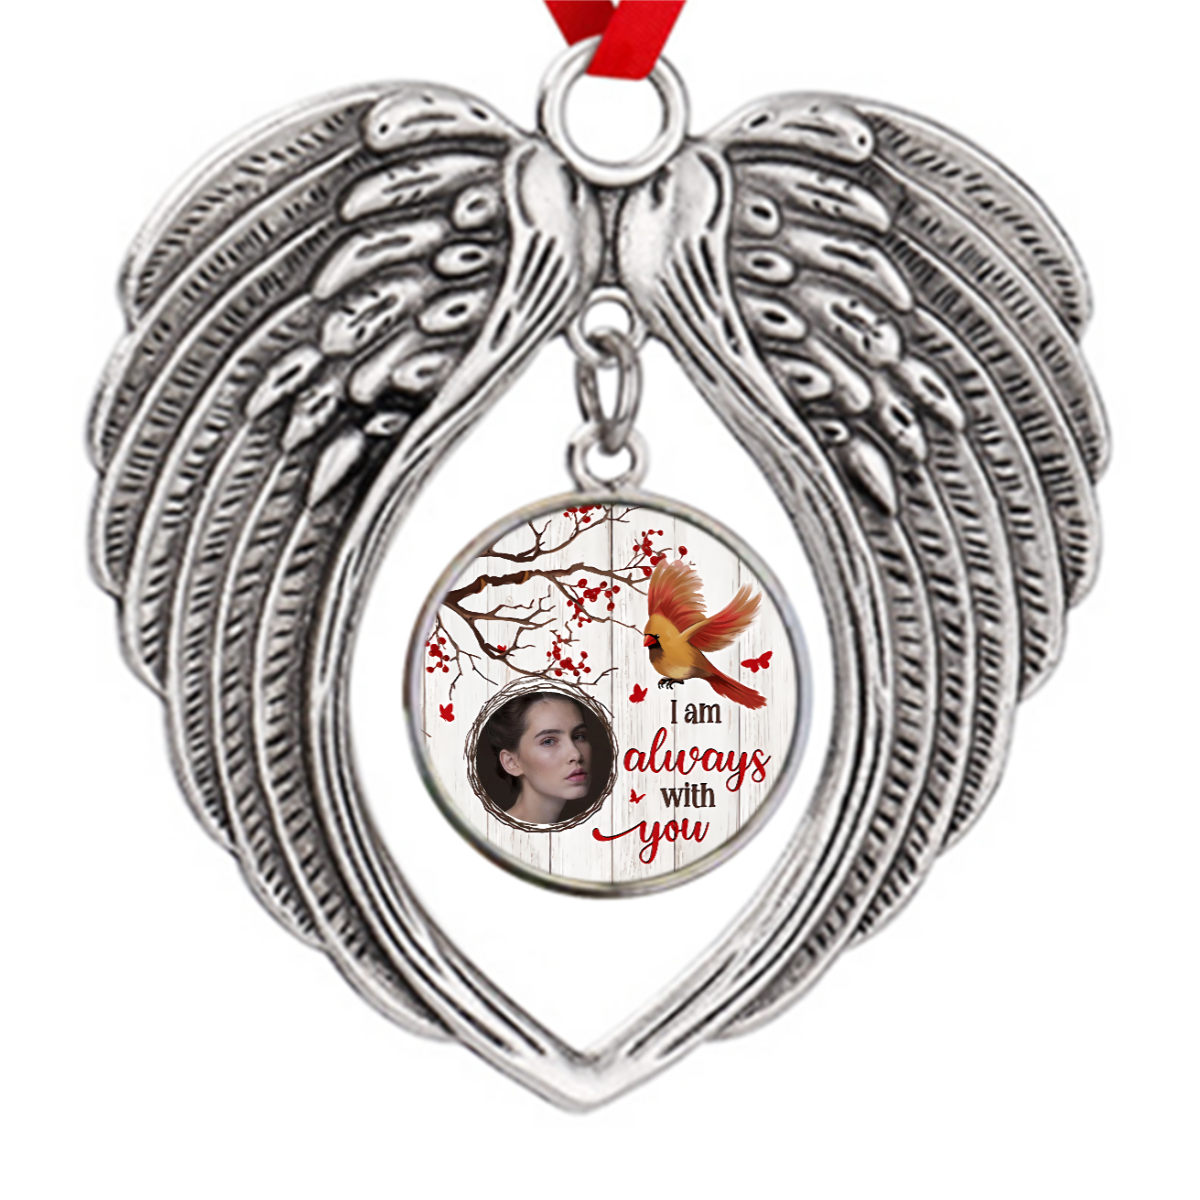 Cherry Branch Always With You Cardinal Photo Personalized Zinc Alloy Ornaments